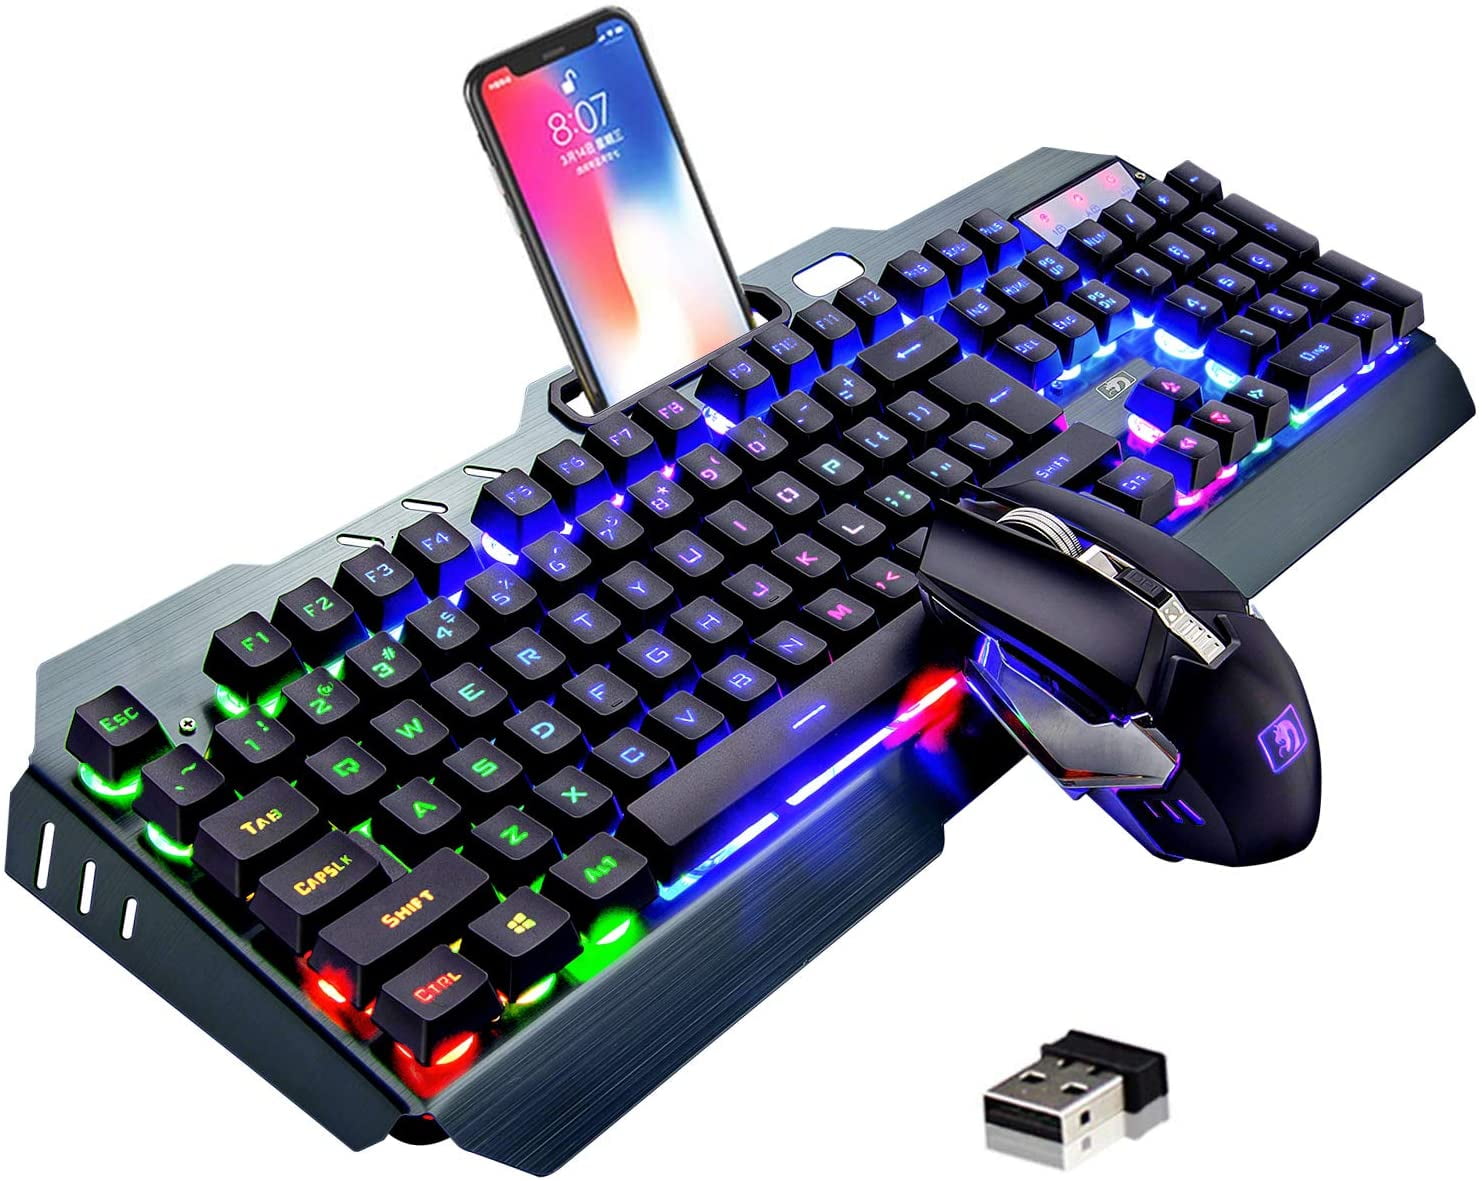 Wireless Keyboard and Mouse,Rainbow LED Backlit Rechargeable Keyboard Mouse with 3800mAh Battery